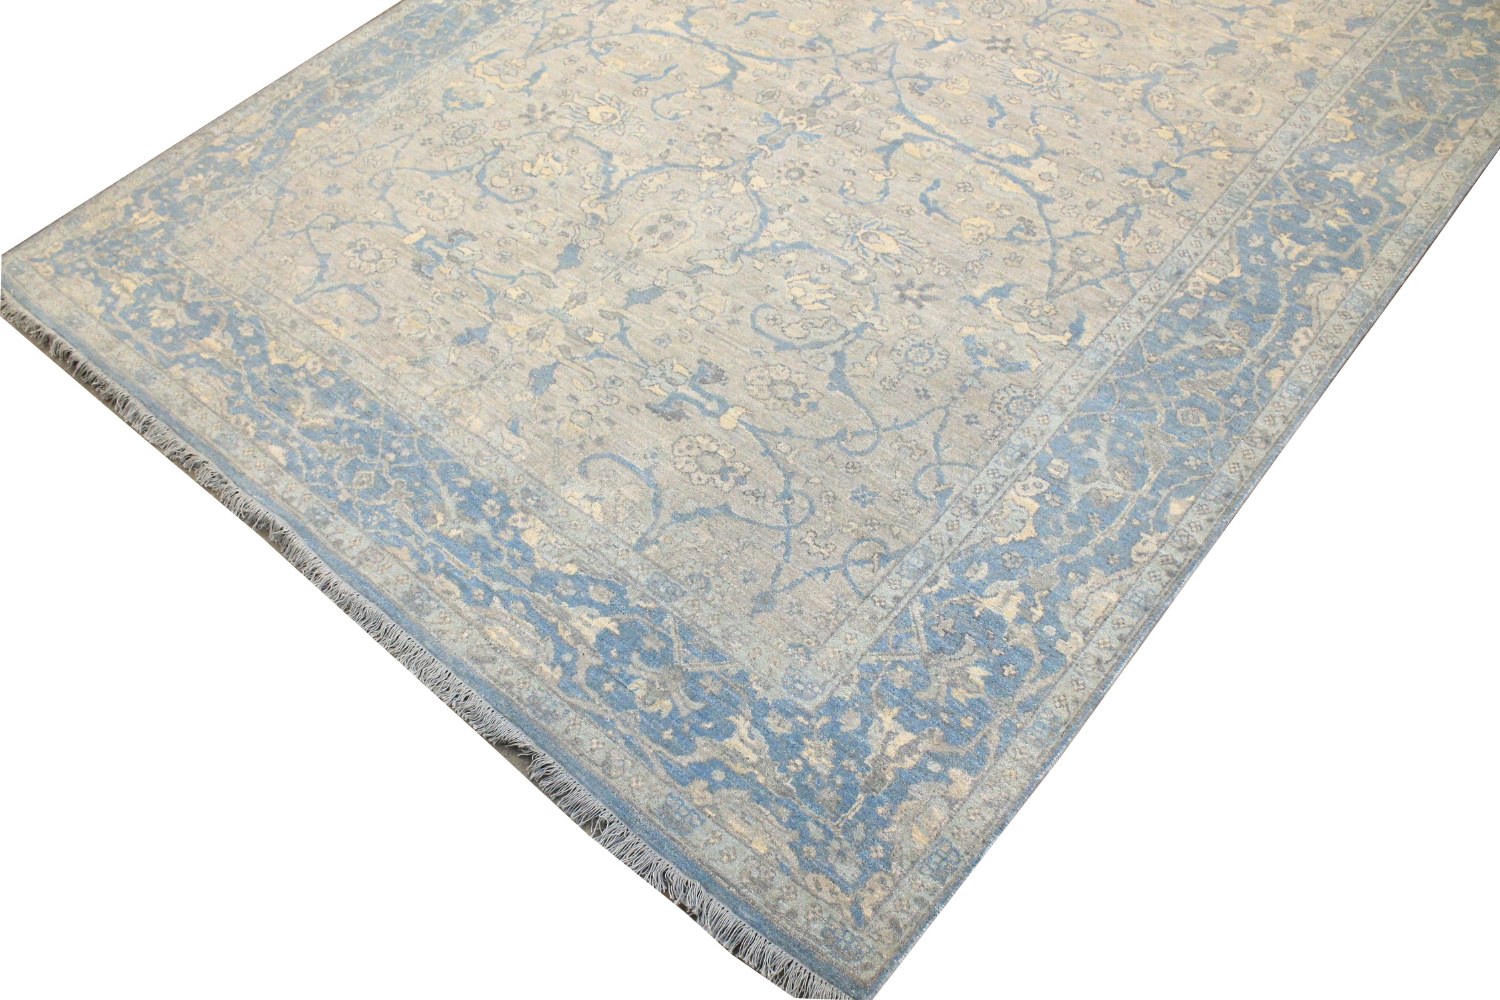 8x10 Traditional Hand Knotted Wool Area Rug - MR028374